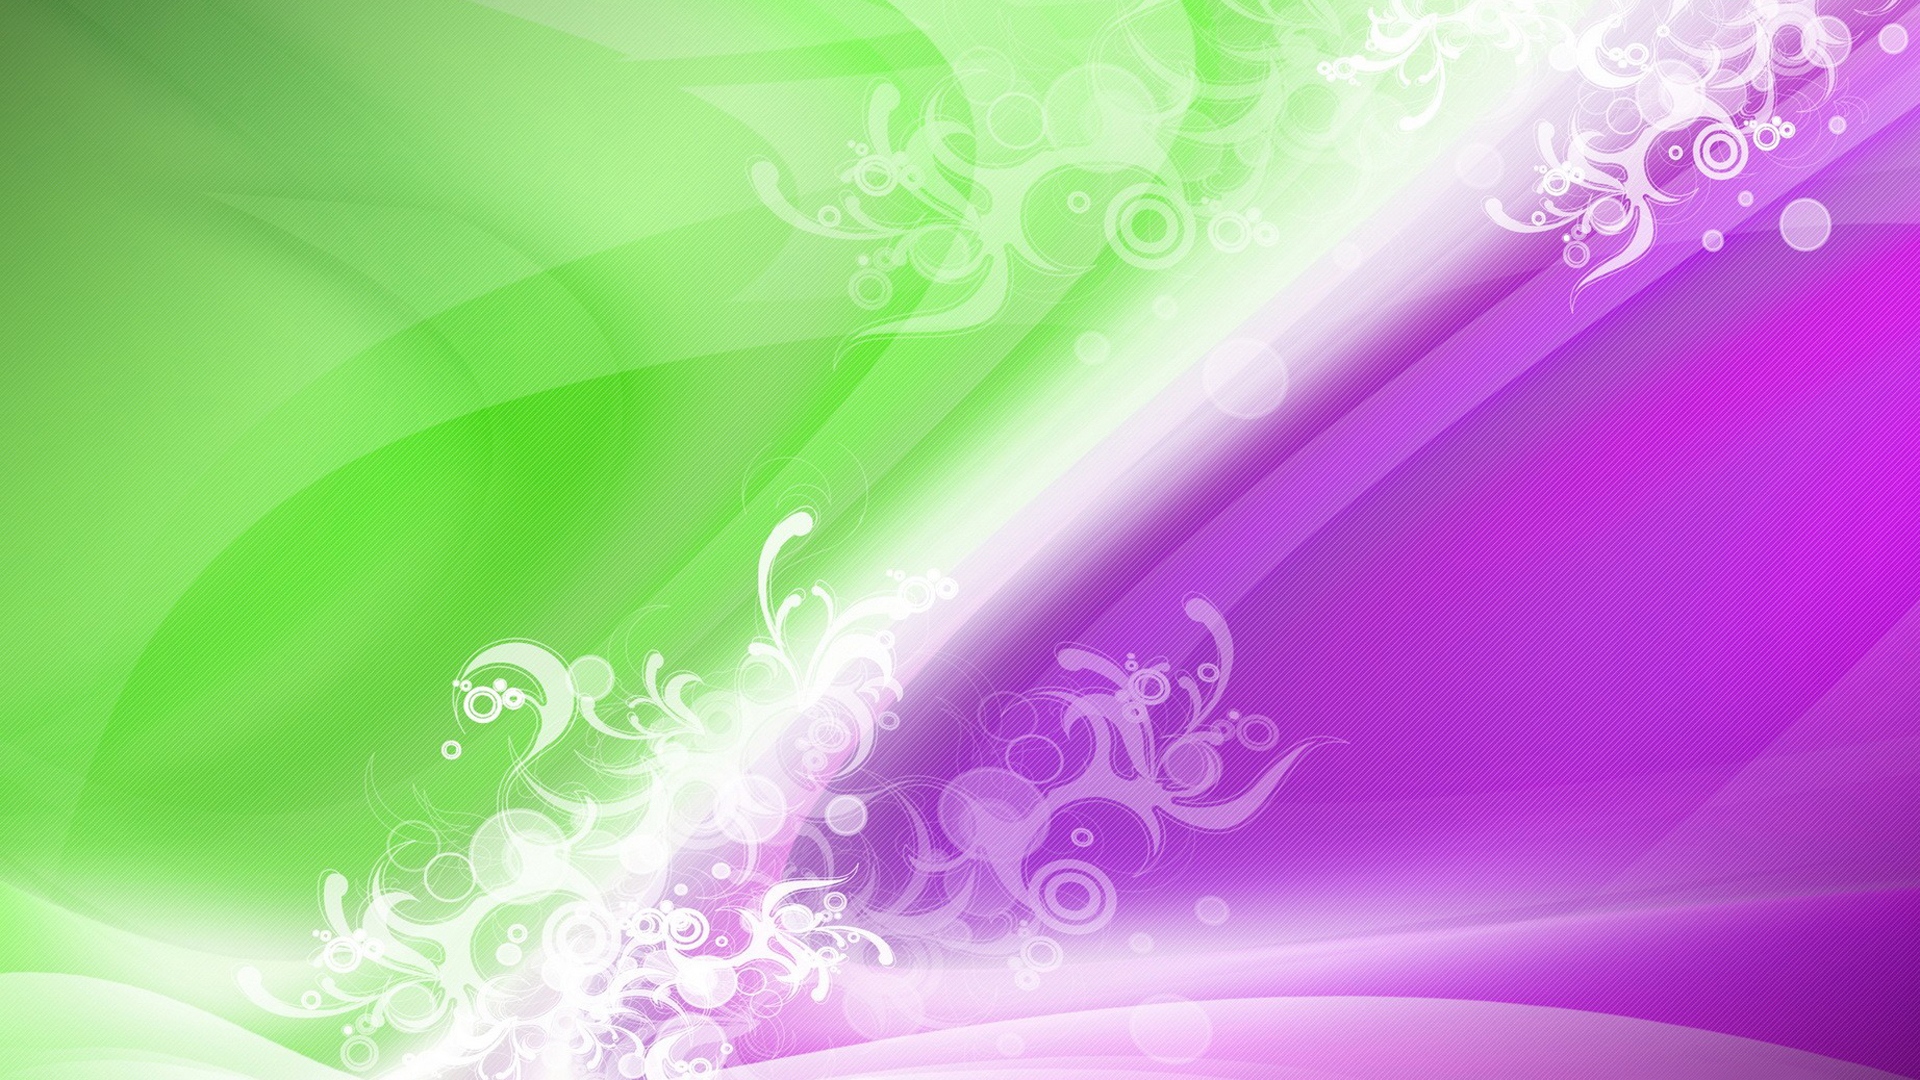 Wallpaper Tracery Green Violet Shine - Violet And Green Background - HD Wallpaper 